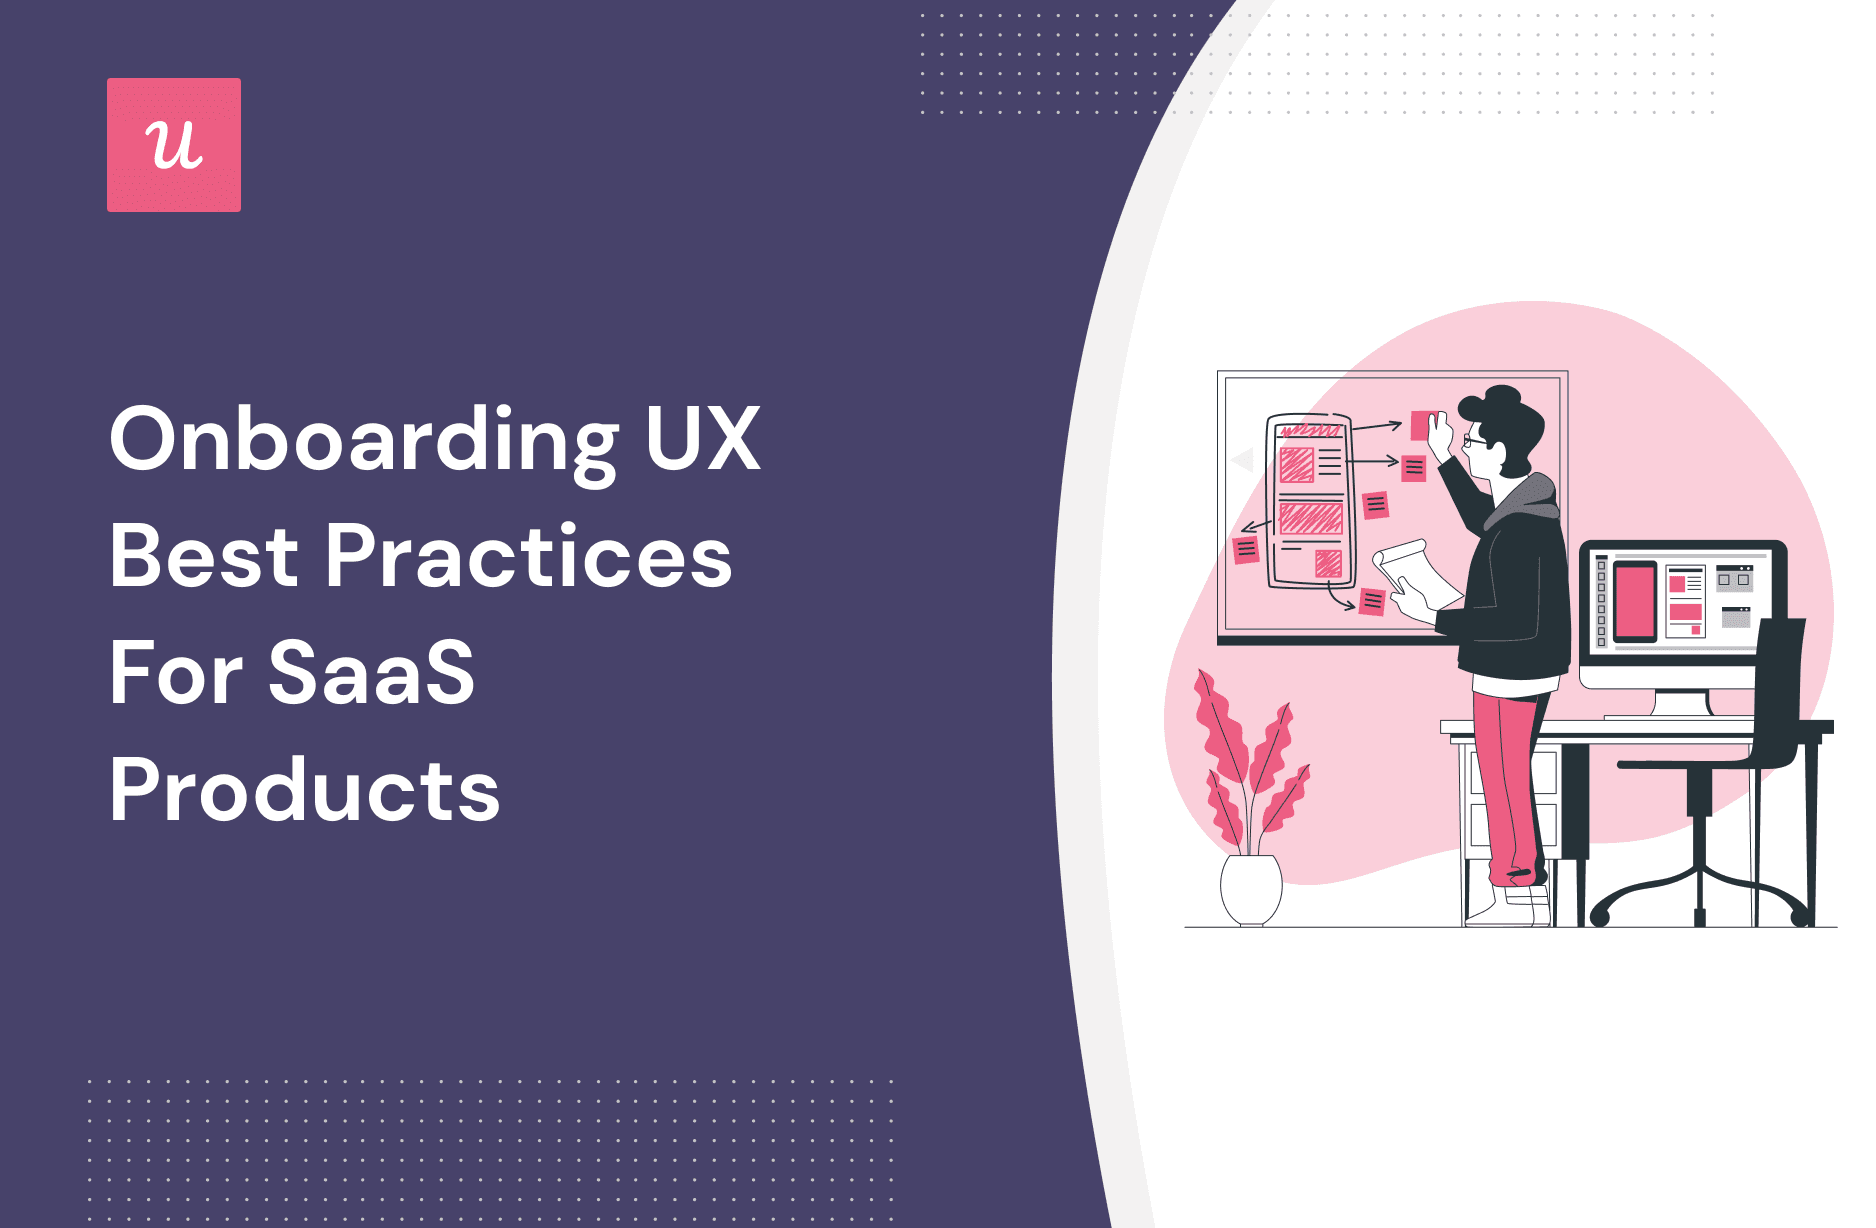 Onboarding UX Best Practices For SaaS Products cover